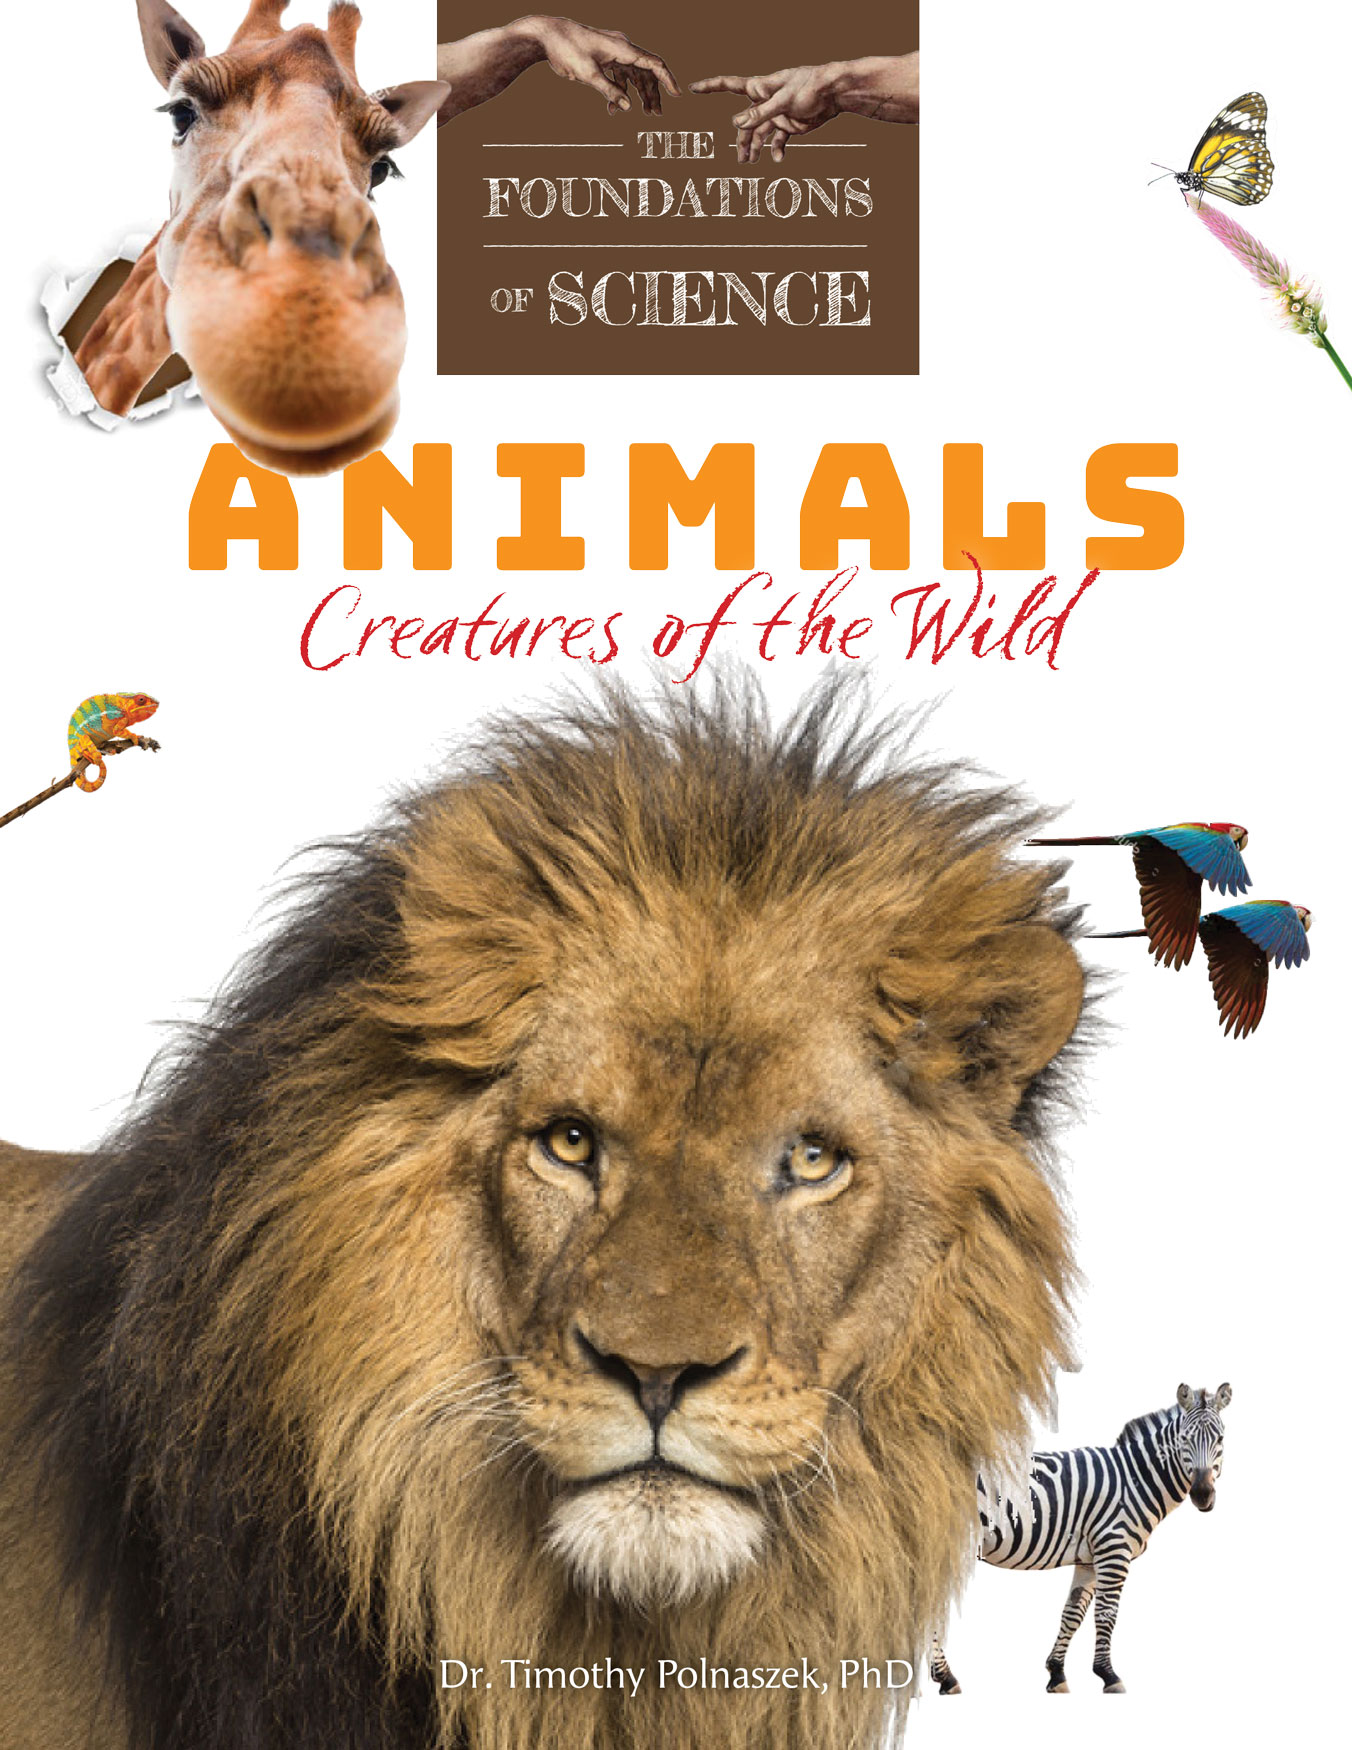 Foundations of Science Animals Creatures of the Wild Textbook / Timothy Polnaszek